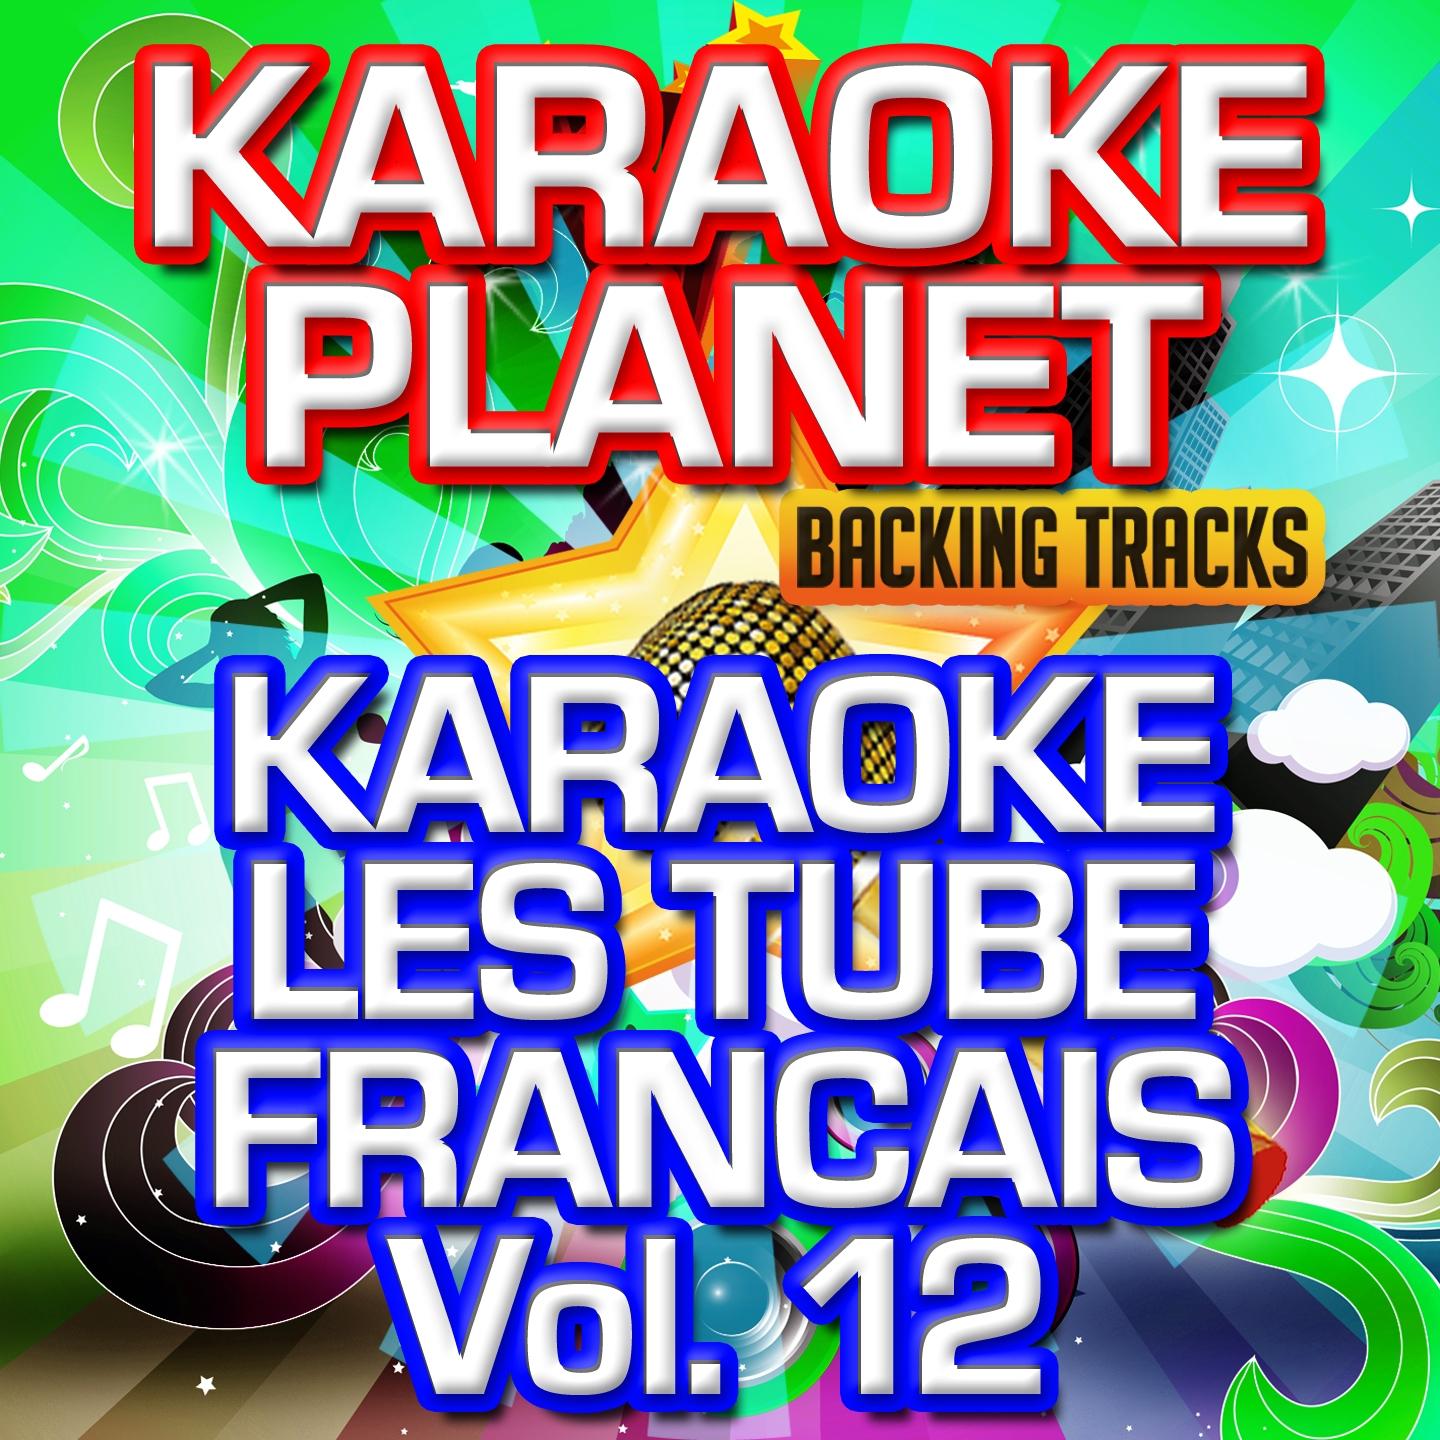 Tout le monde Karaoke Version With Background Vocals Originally Performed By Ophe lie Winter